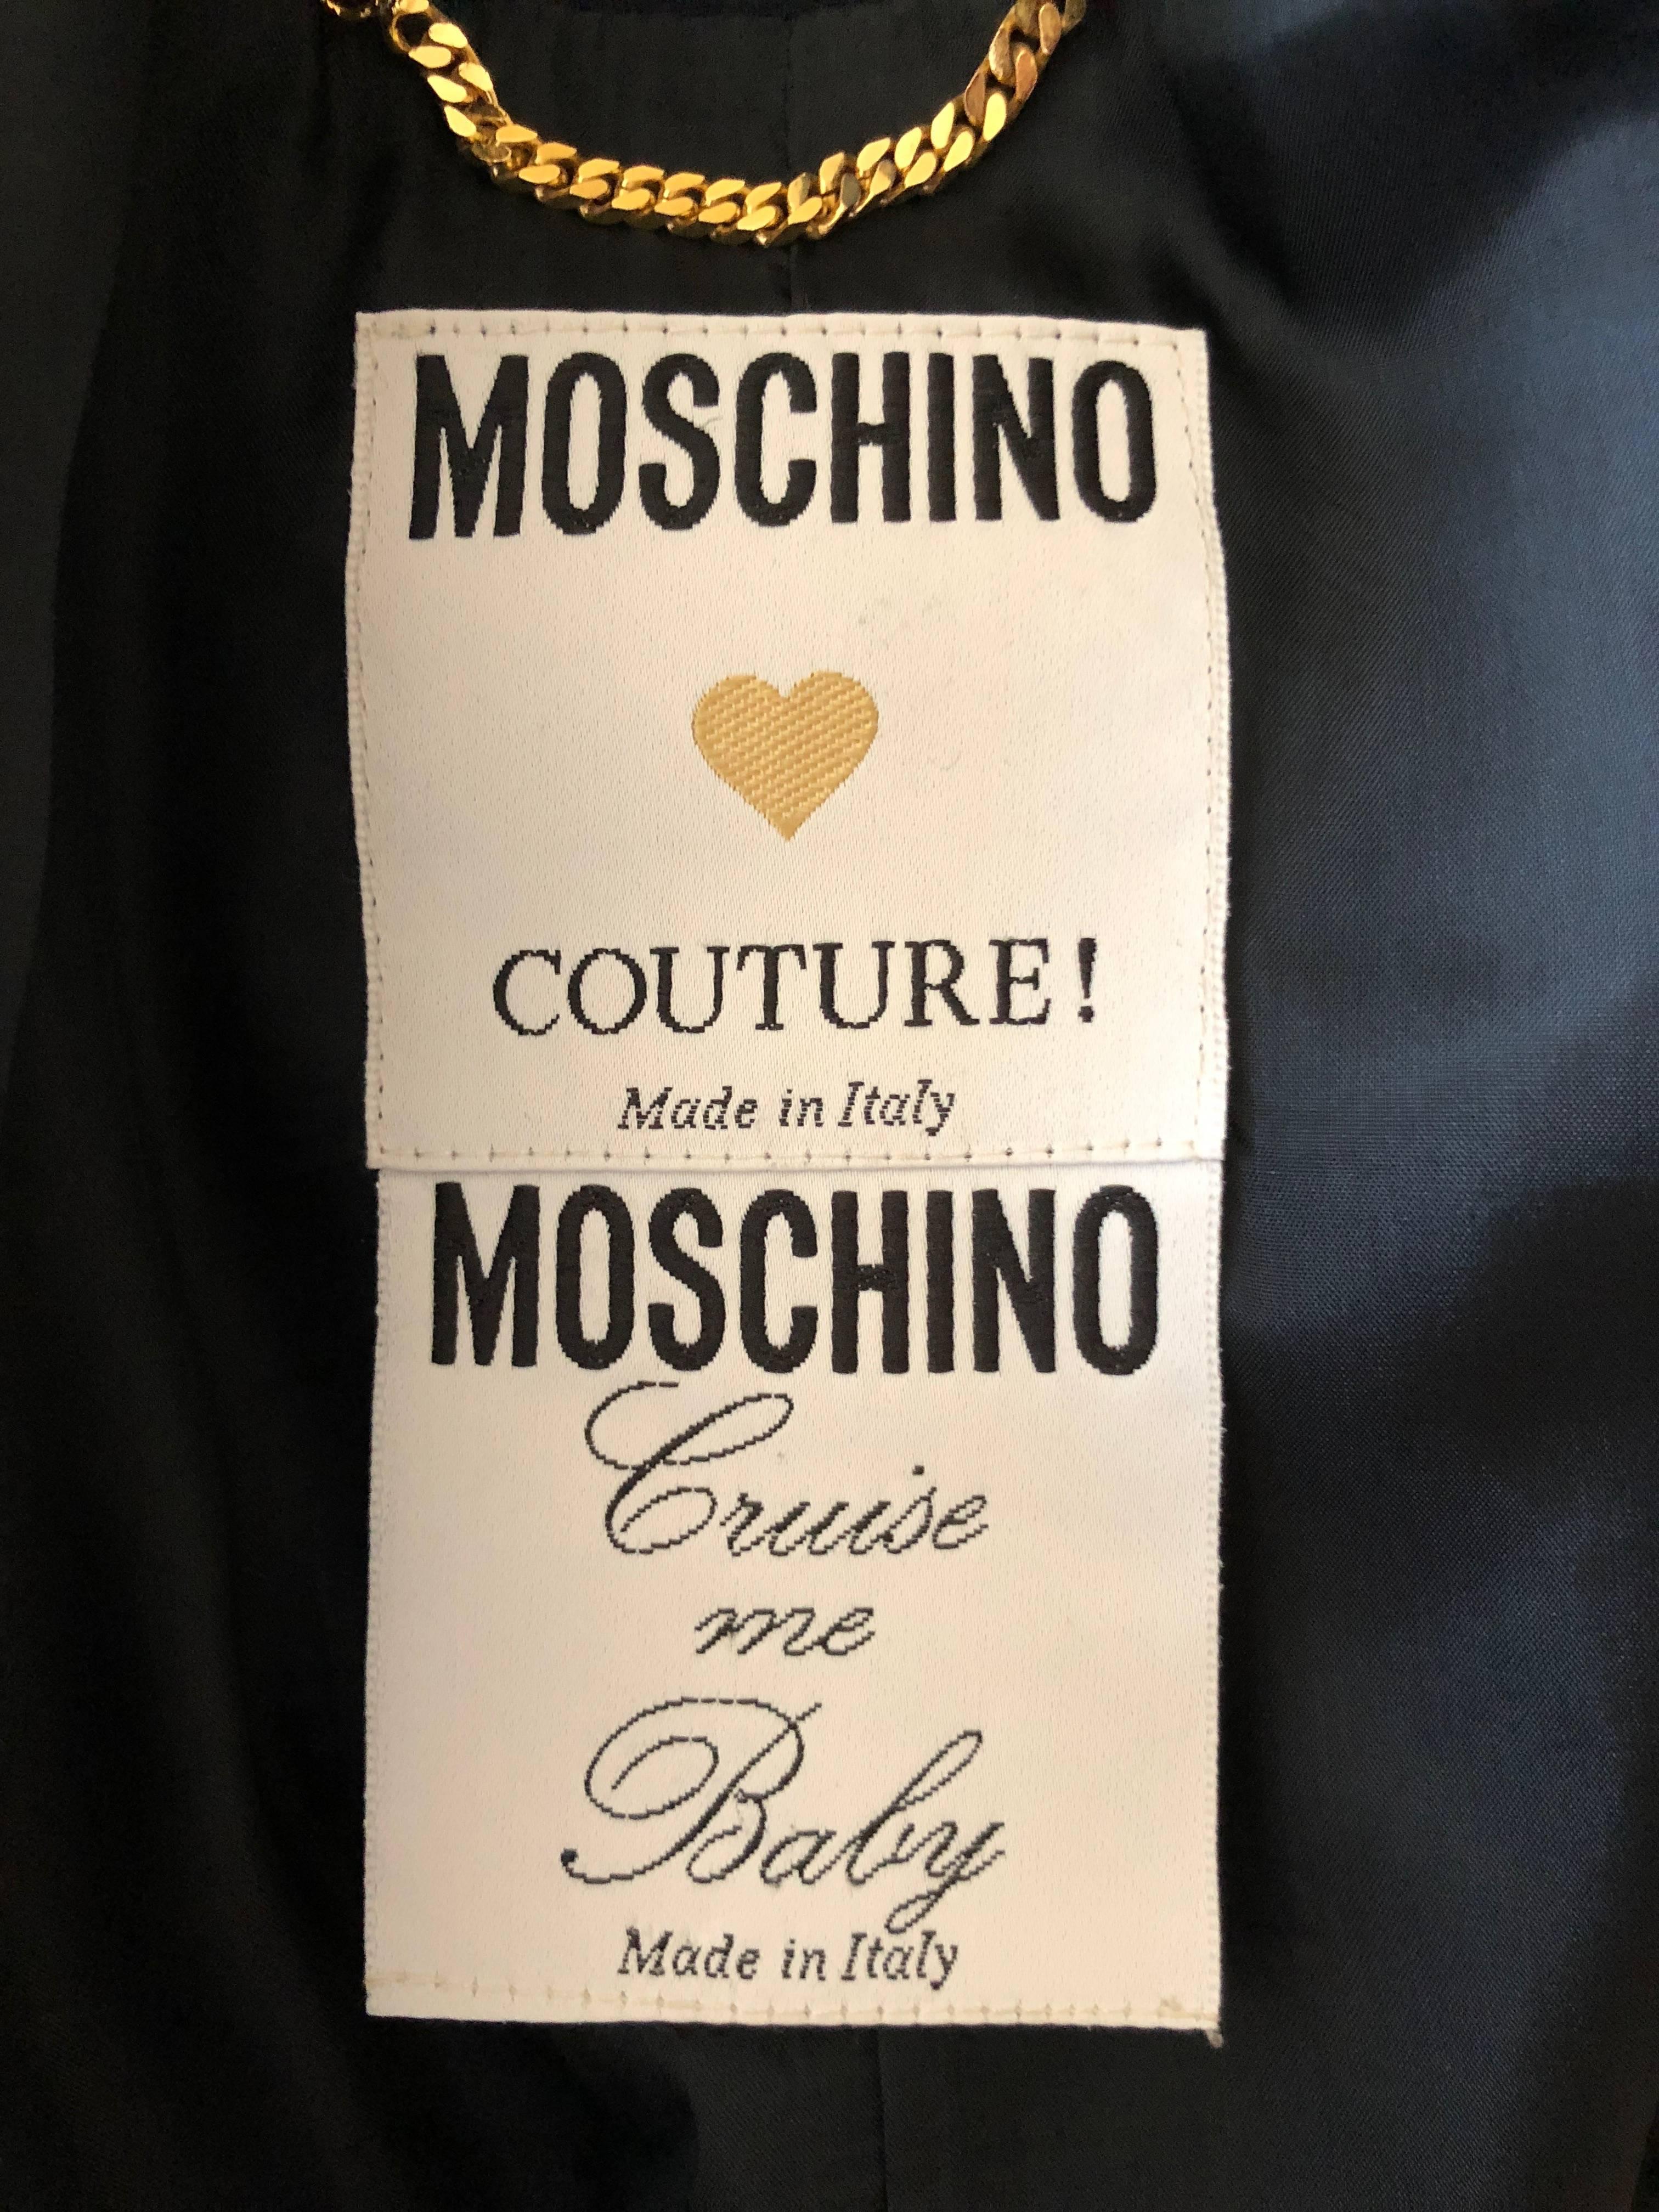 Moschino Couture Cruise me Baby Iconic 1980s Lobster Embroidered Mini Skirt Suit For Sale 3